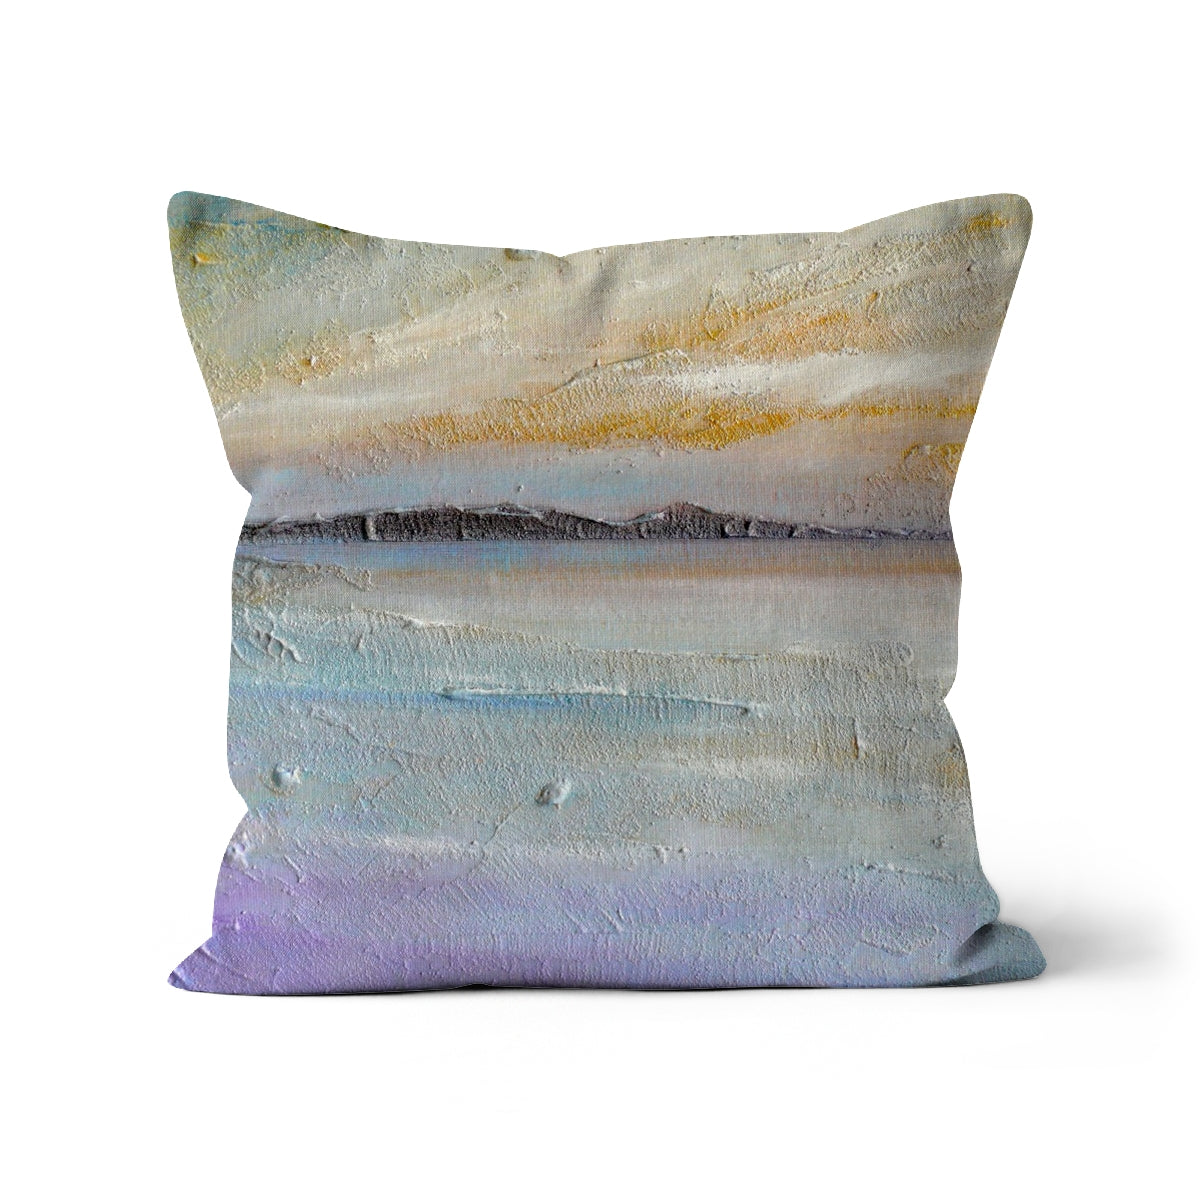 Sollas Beach South Uist Art Gifts Cushion-Cushions-Hebridean Islands Art Gallery-Linen-22"x22"-Paintings, Prints, Homeware, Art Gifts From Scotland By Scottish Artist Kevin Hunter